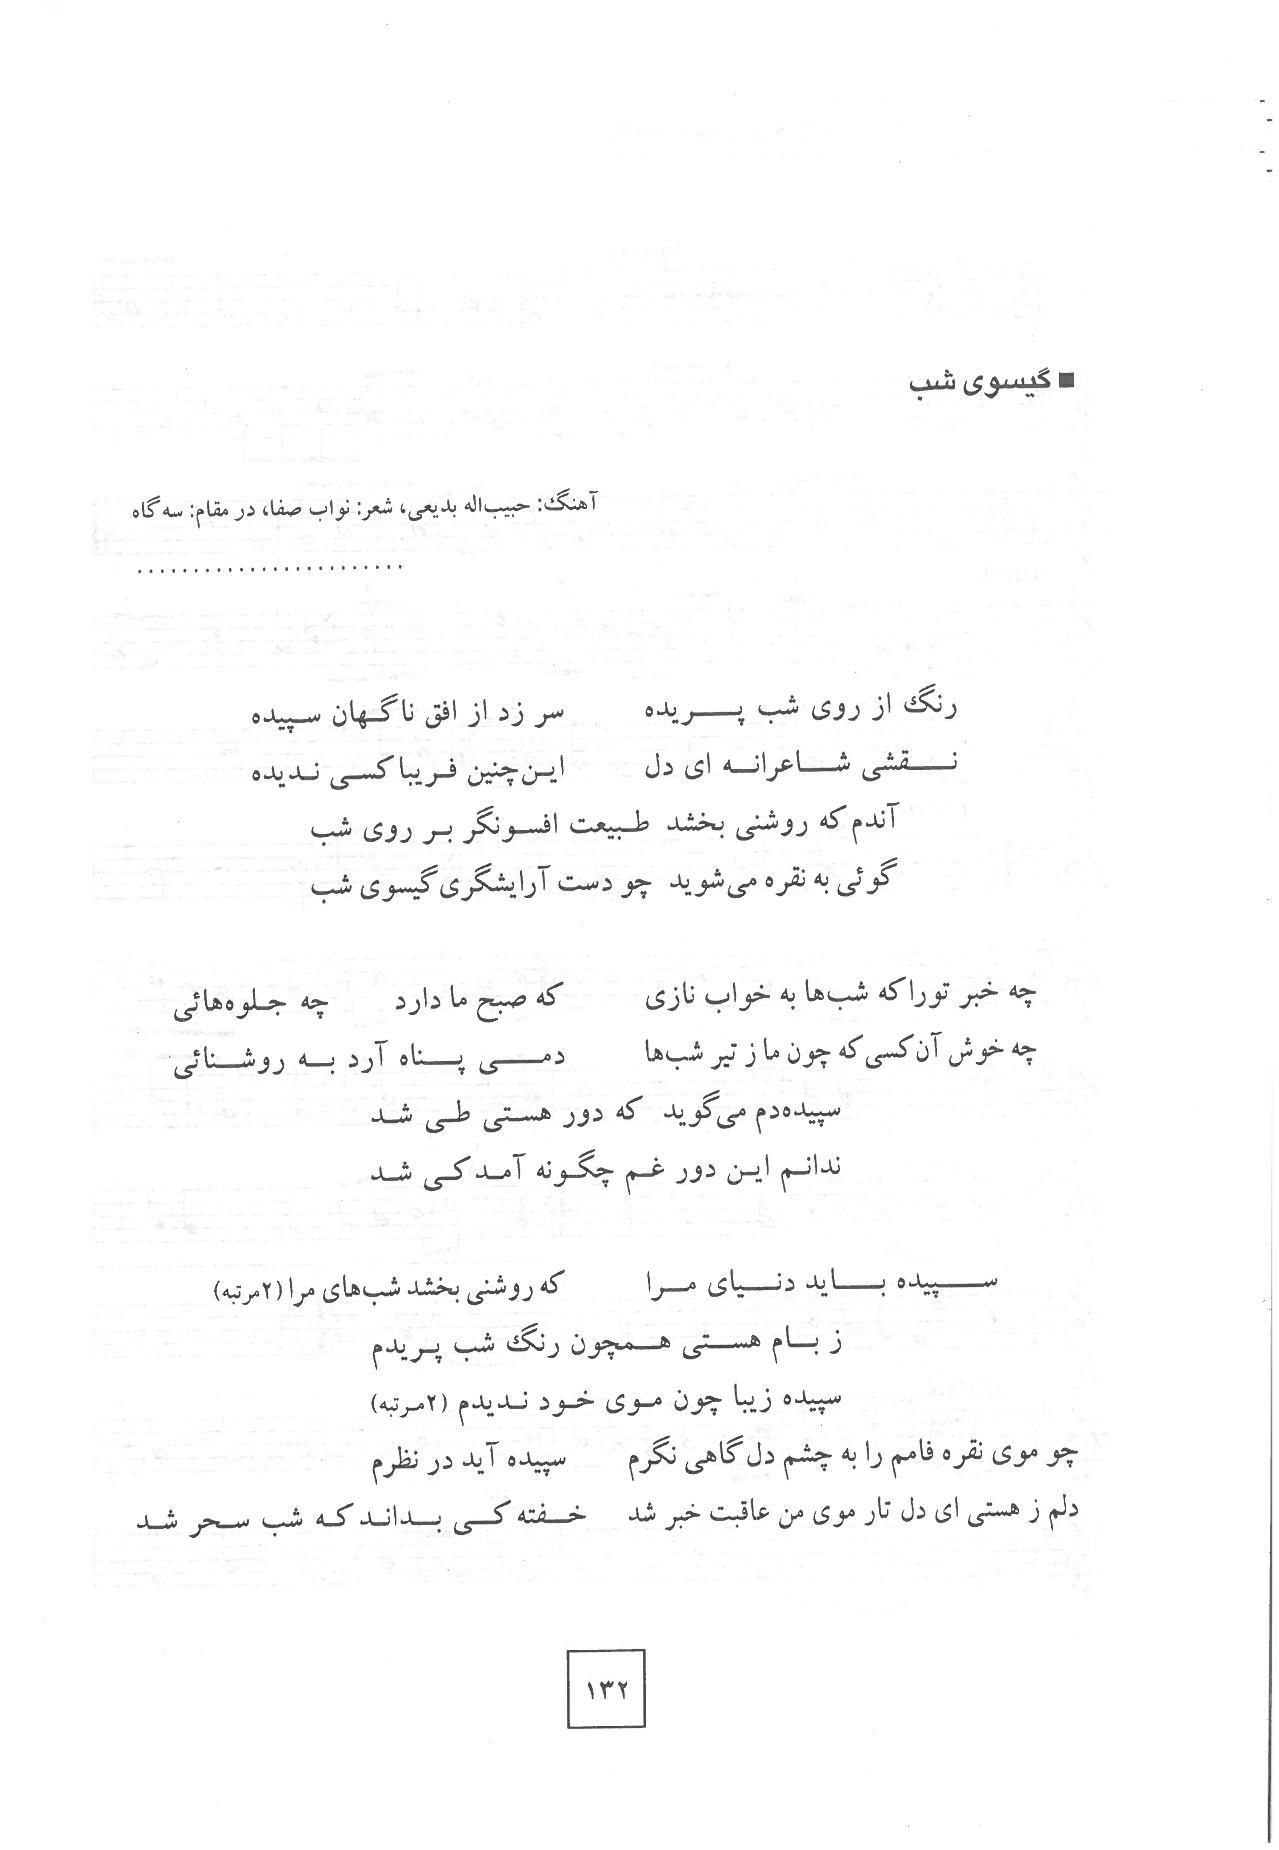 A page of arabic writing with some text